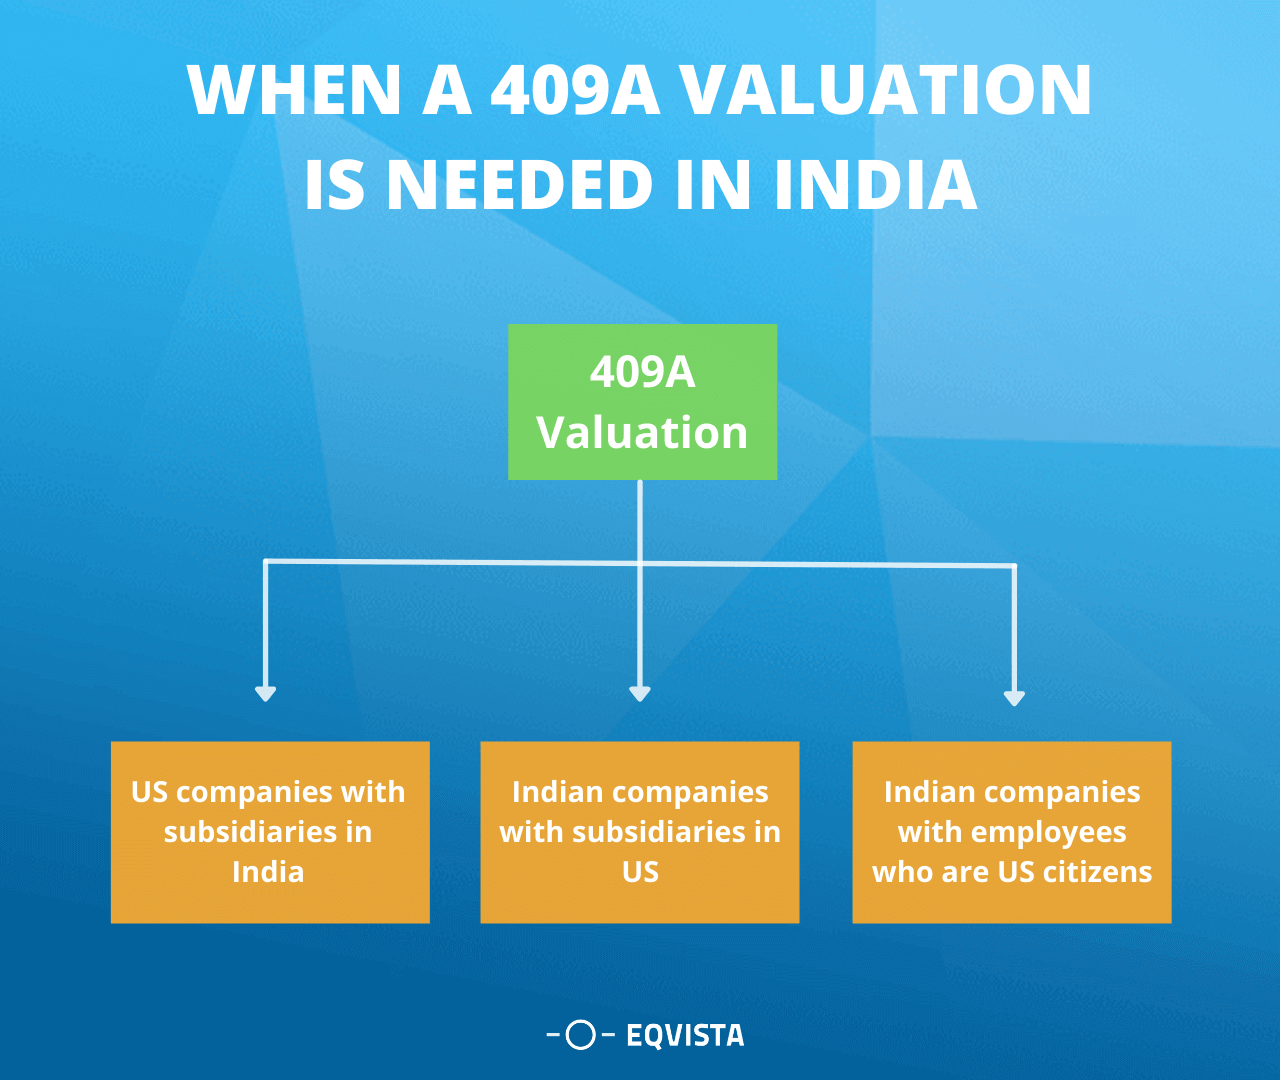 When is a 409a valuation required for an Indian company?